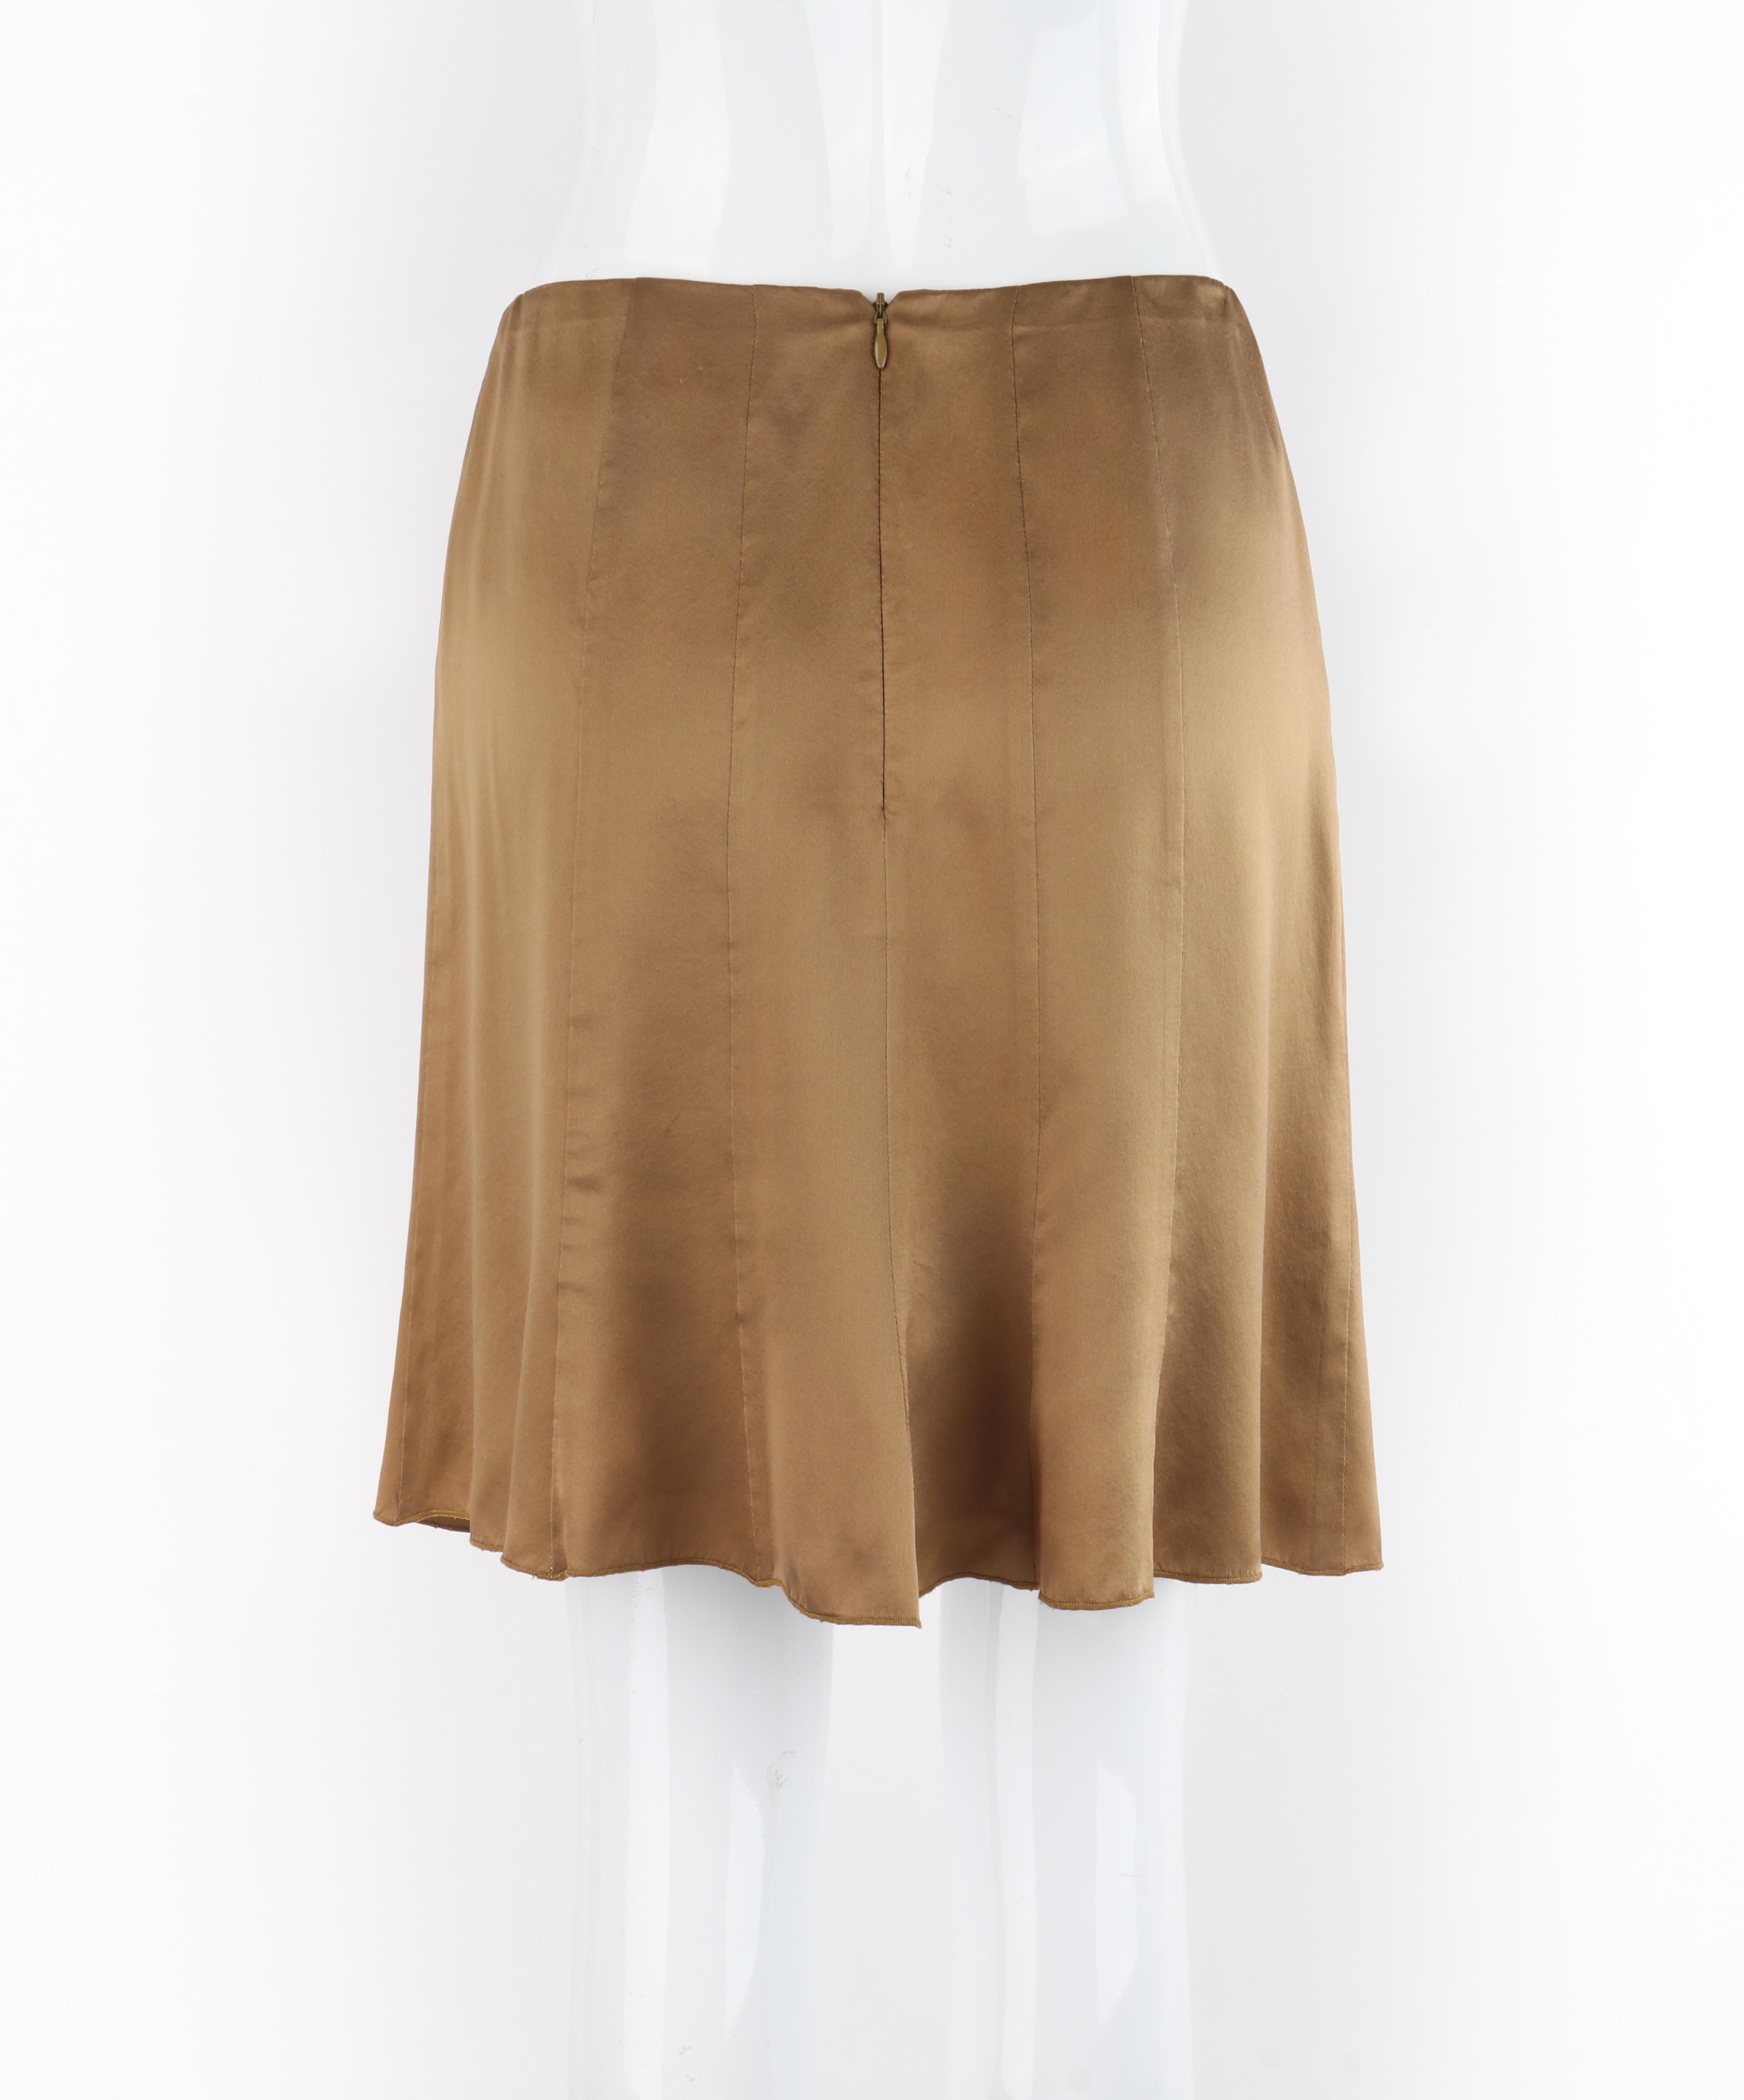 CHANEL Spring 2006 Karl Lagerfeld Bronze Gold Silk Paneling A-Line Mini Skirt In Good Condition For Sale In Thiensville, WI